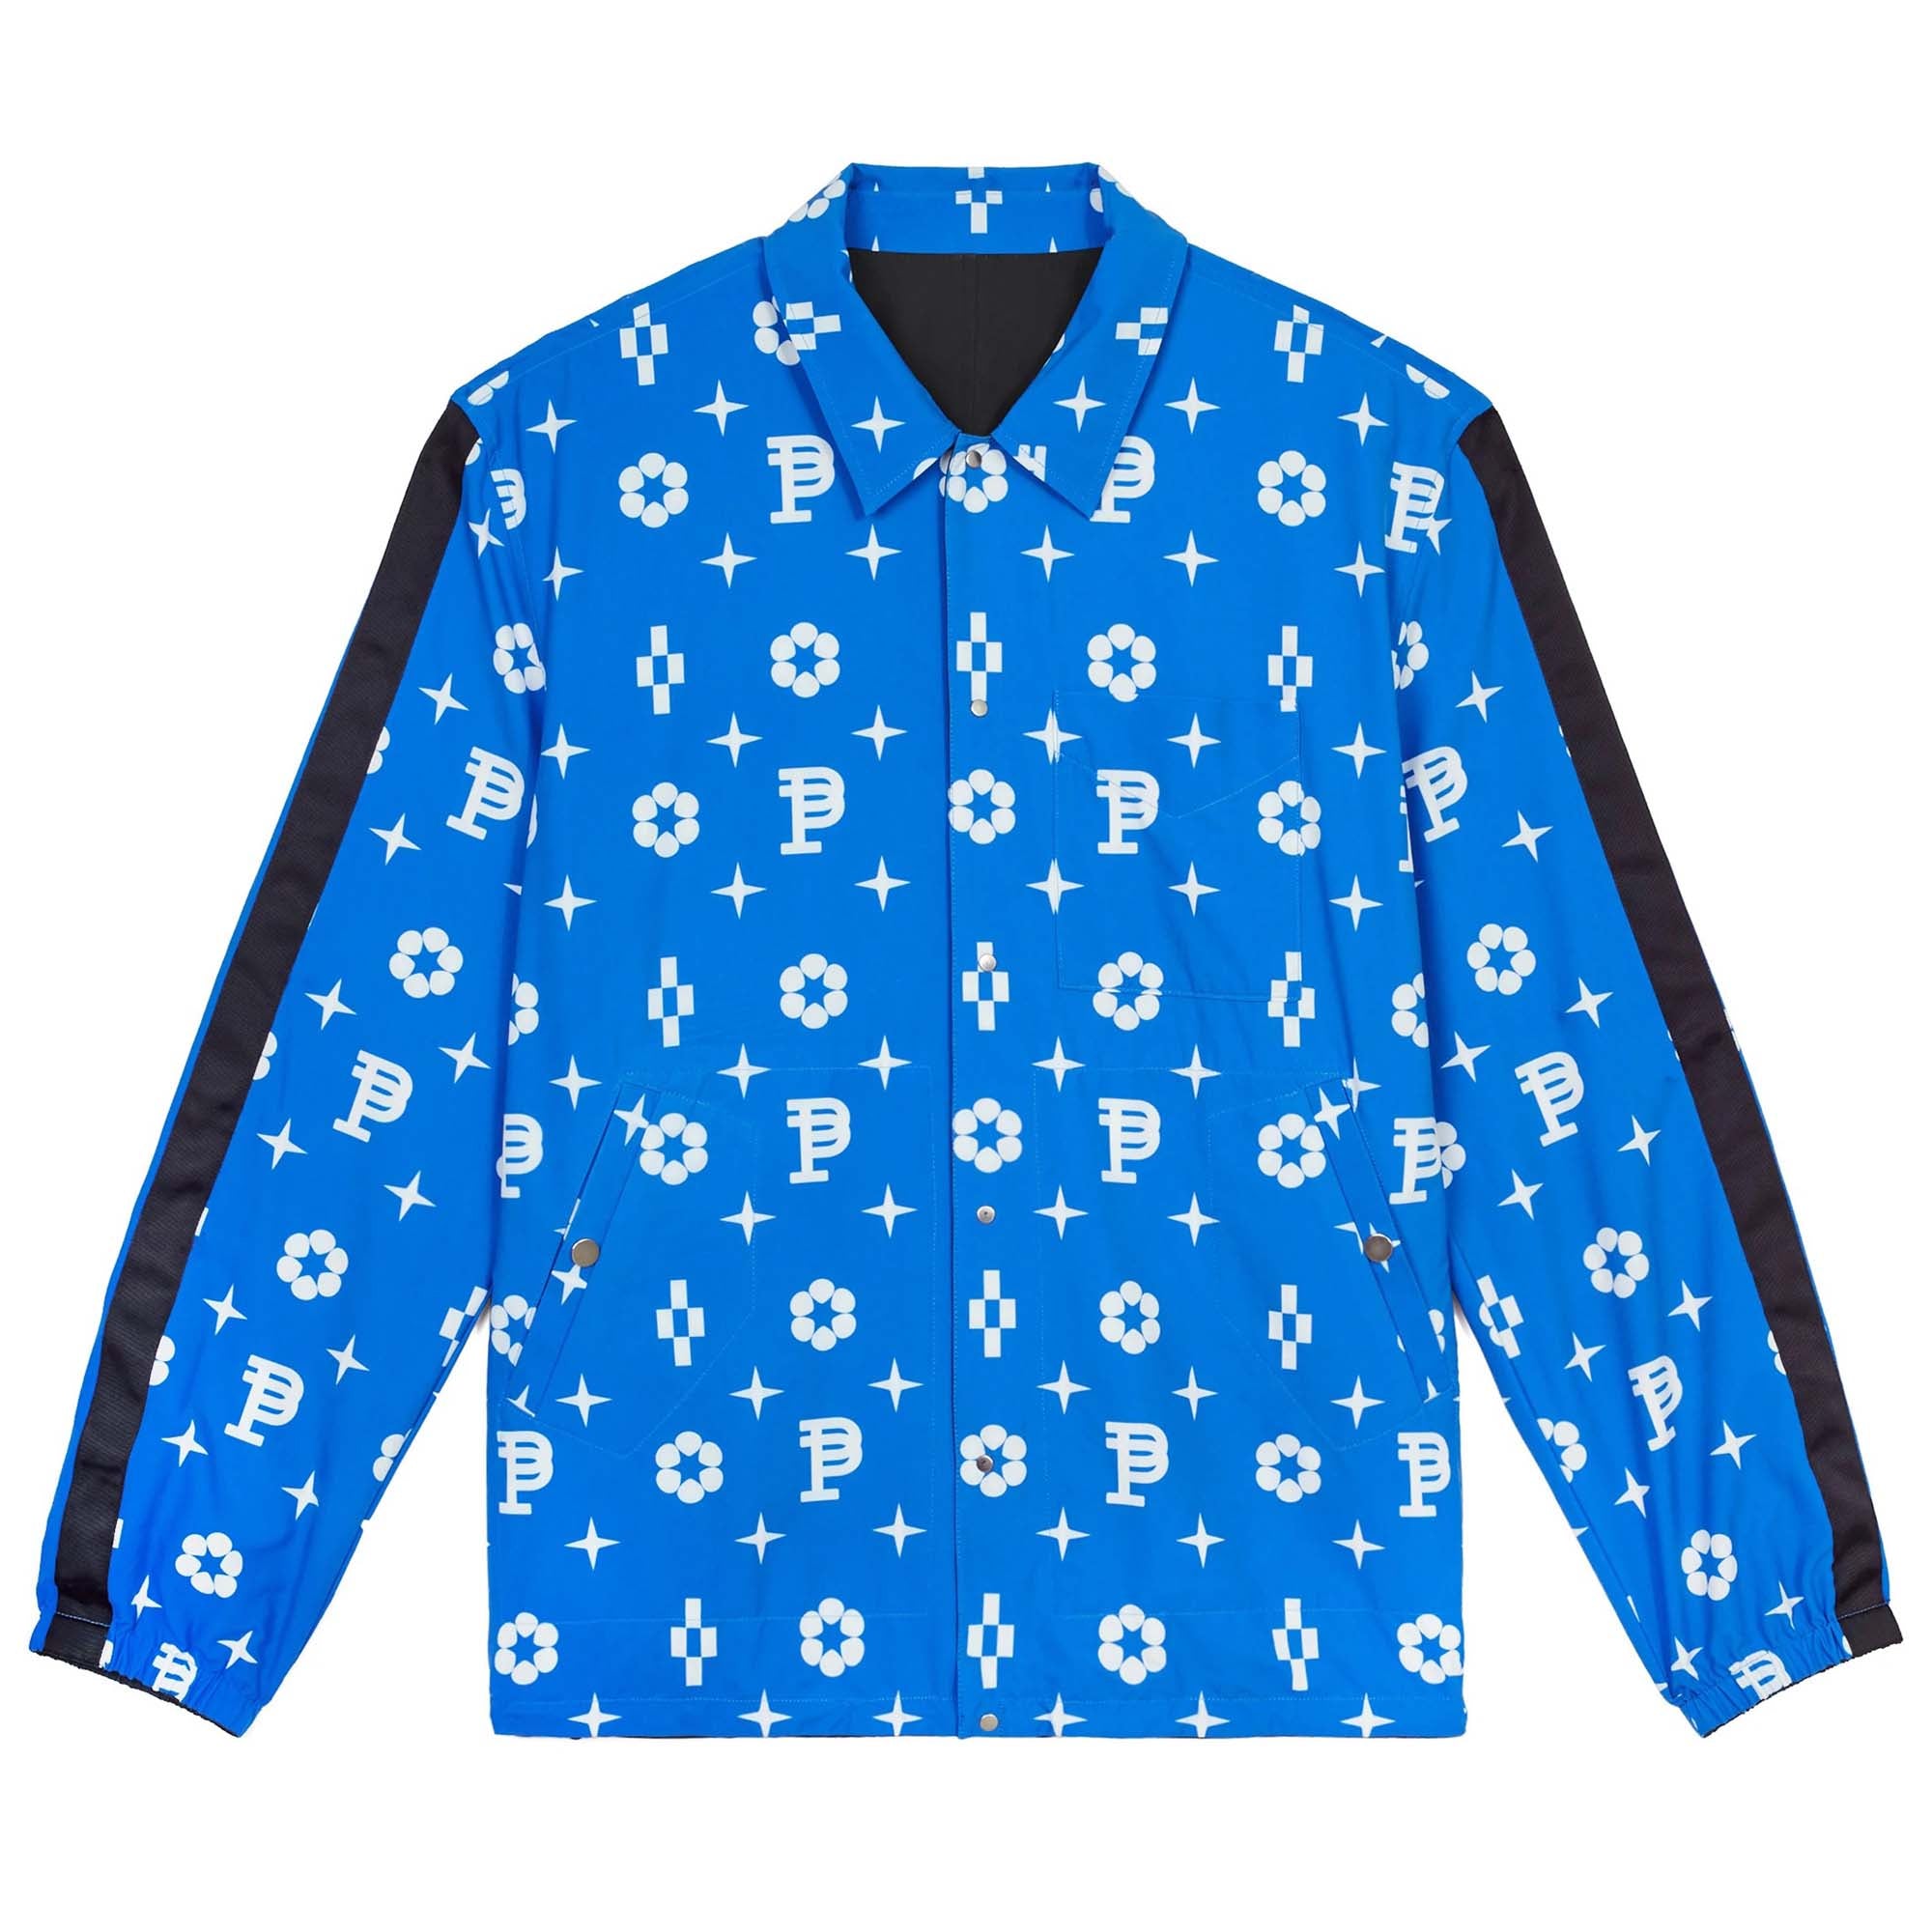 Louis Vuitton Signature Relaxed Jacket